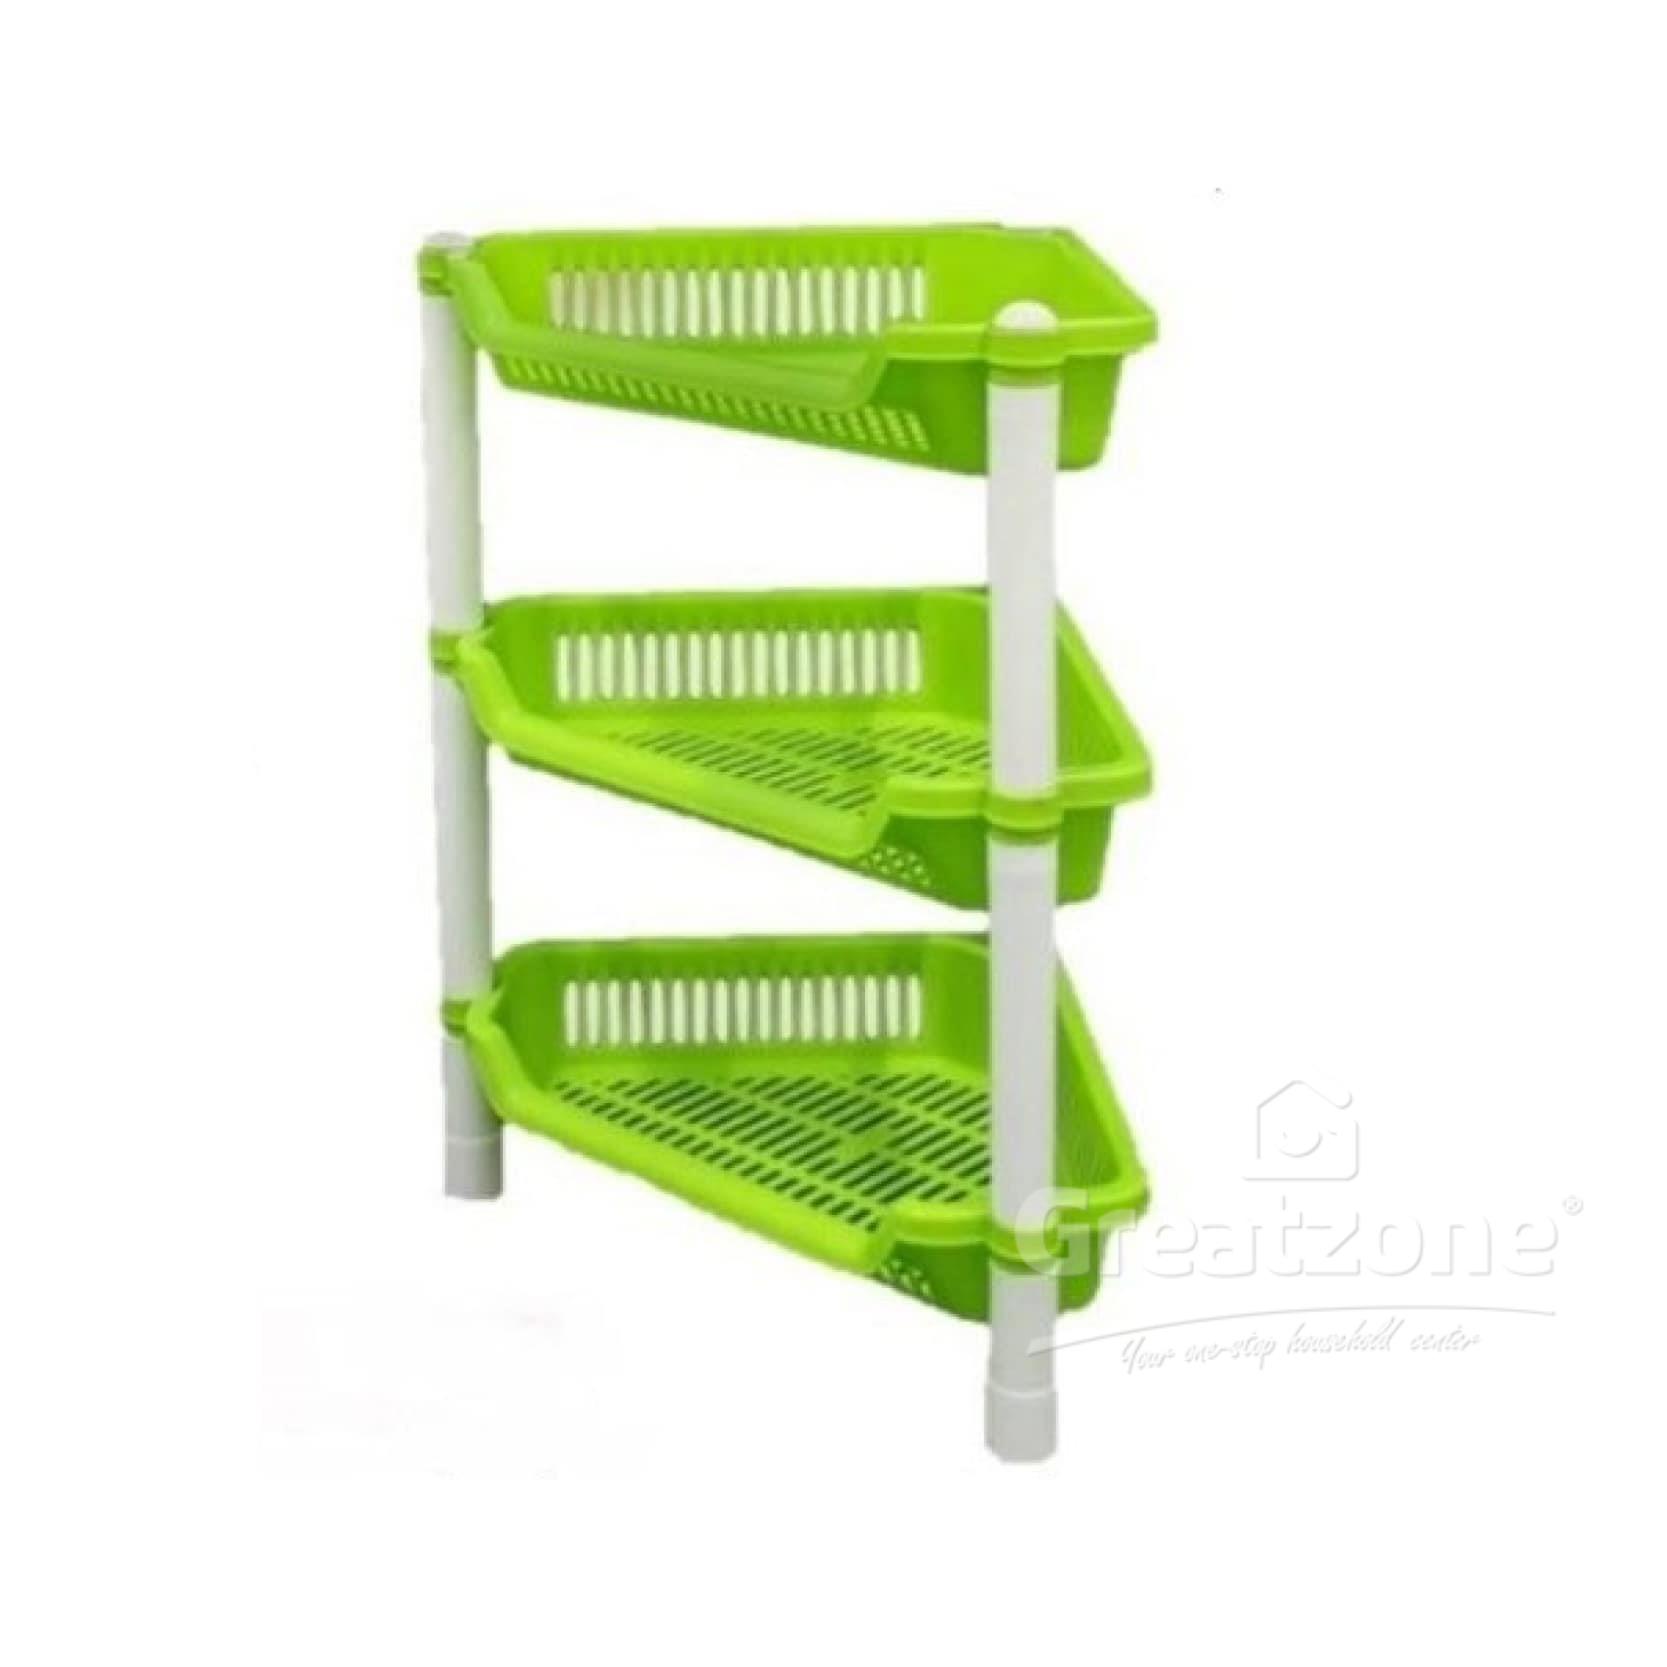 SW TRIANGLE RACK 3TIER  BLUE/GREEN/WHITE 551-3